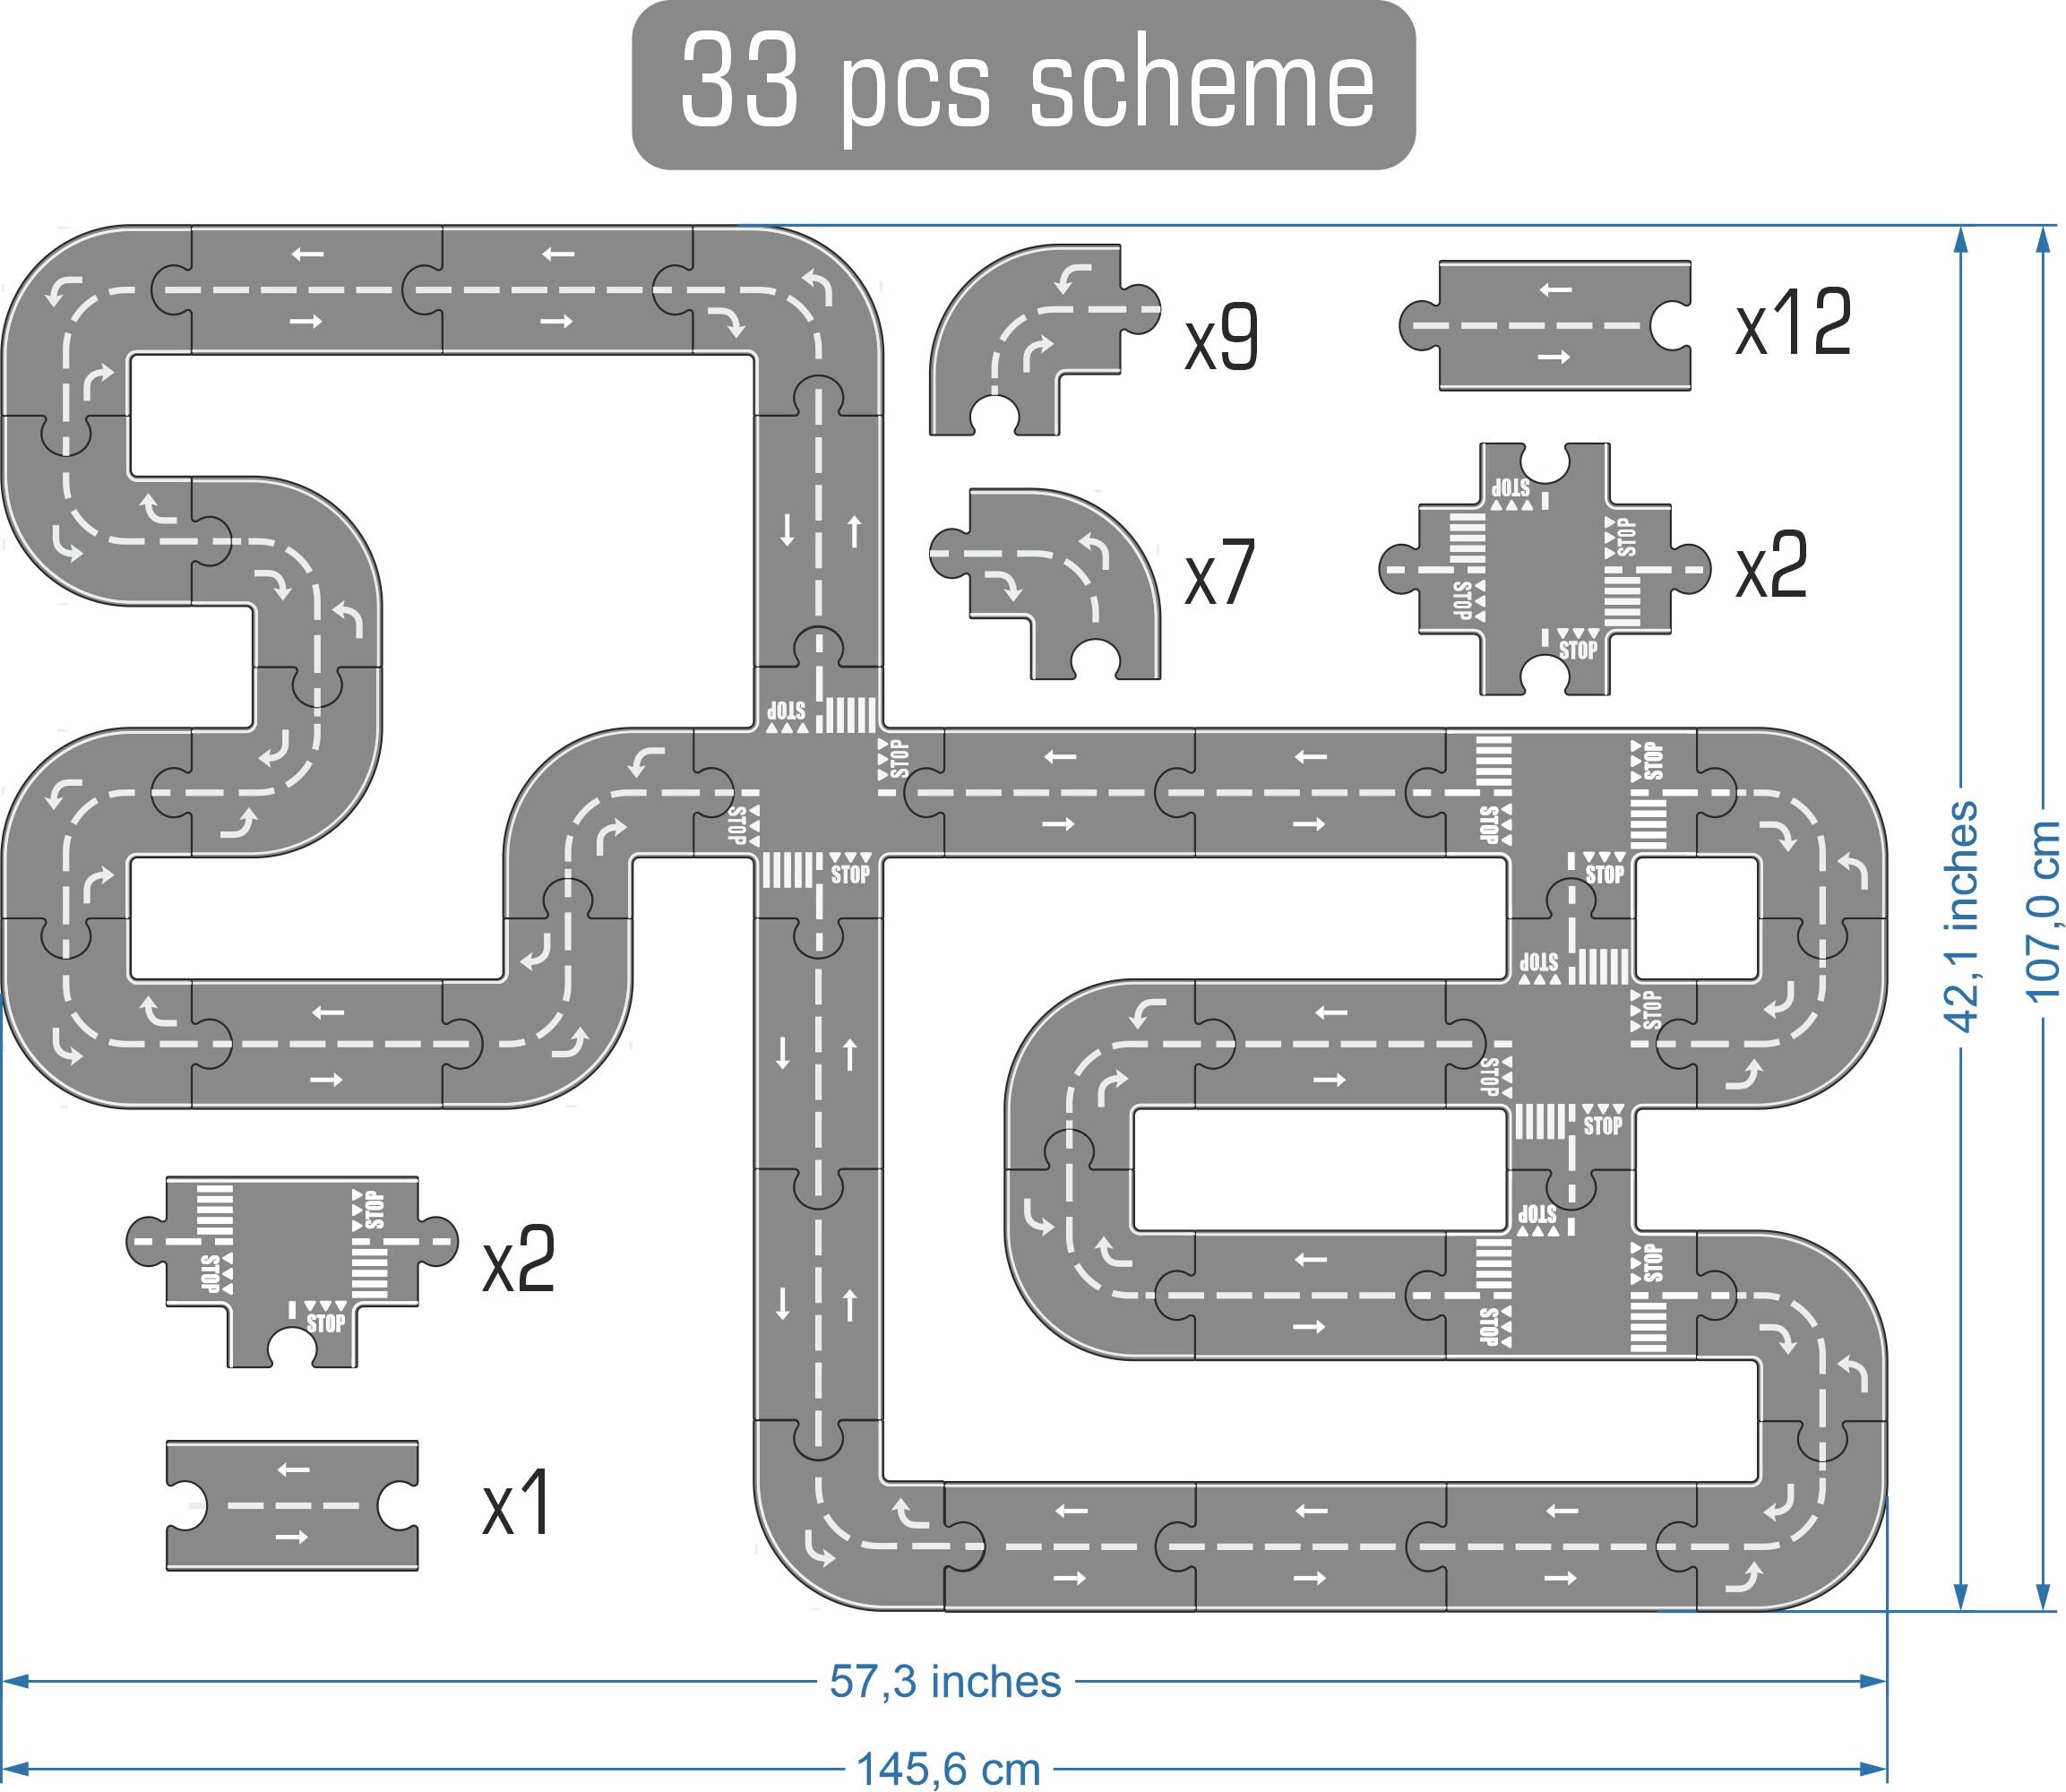 Puzzle roads for toy cars and for toy garages with toy bridges -   Portugal